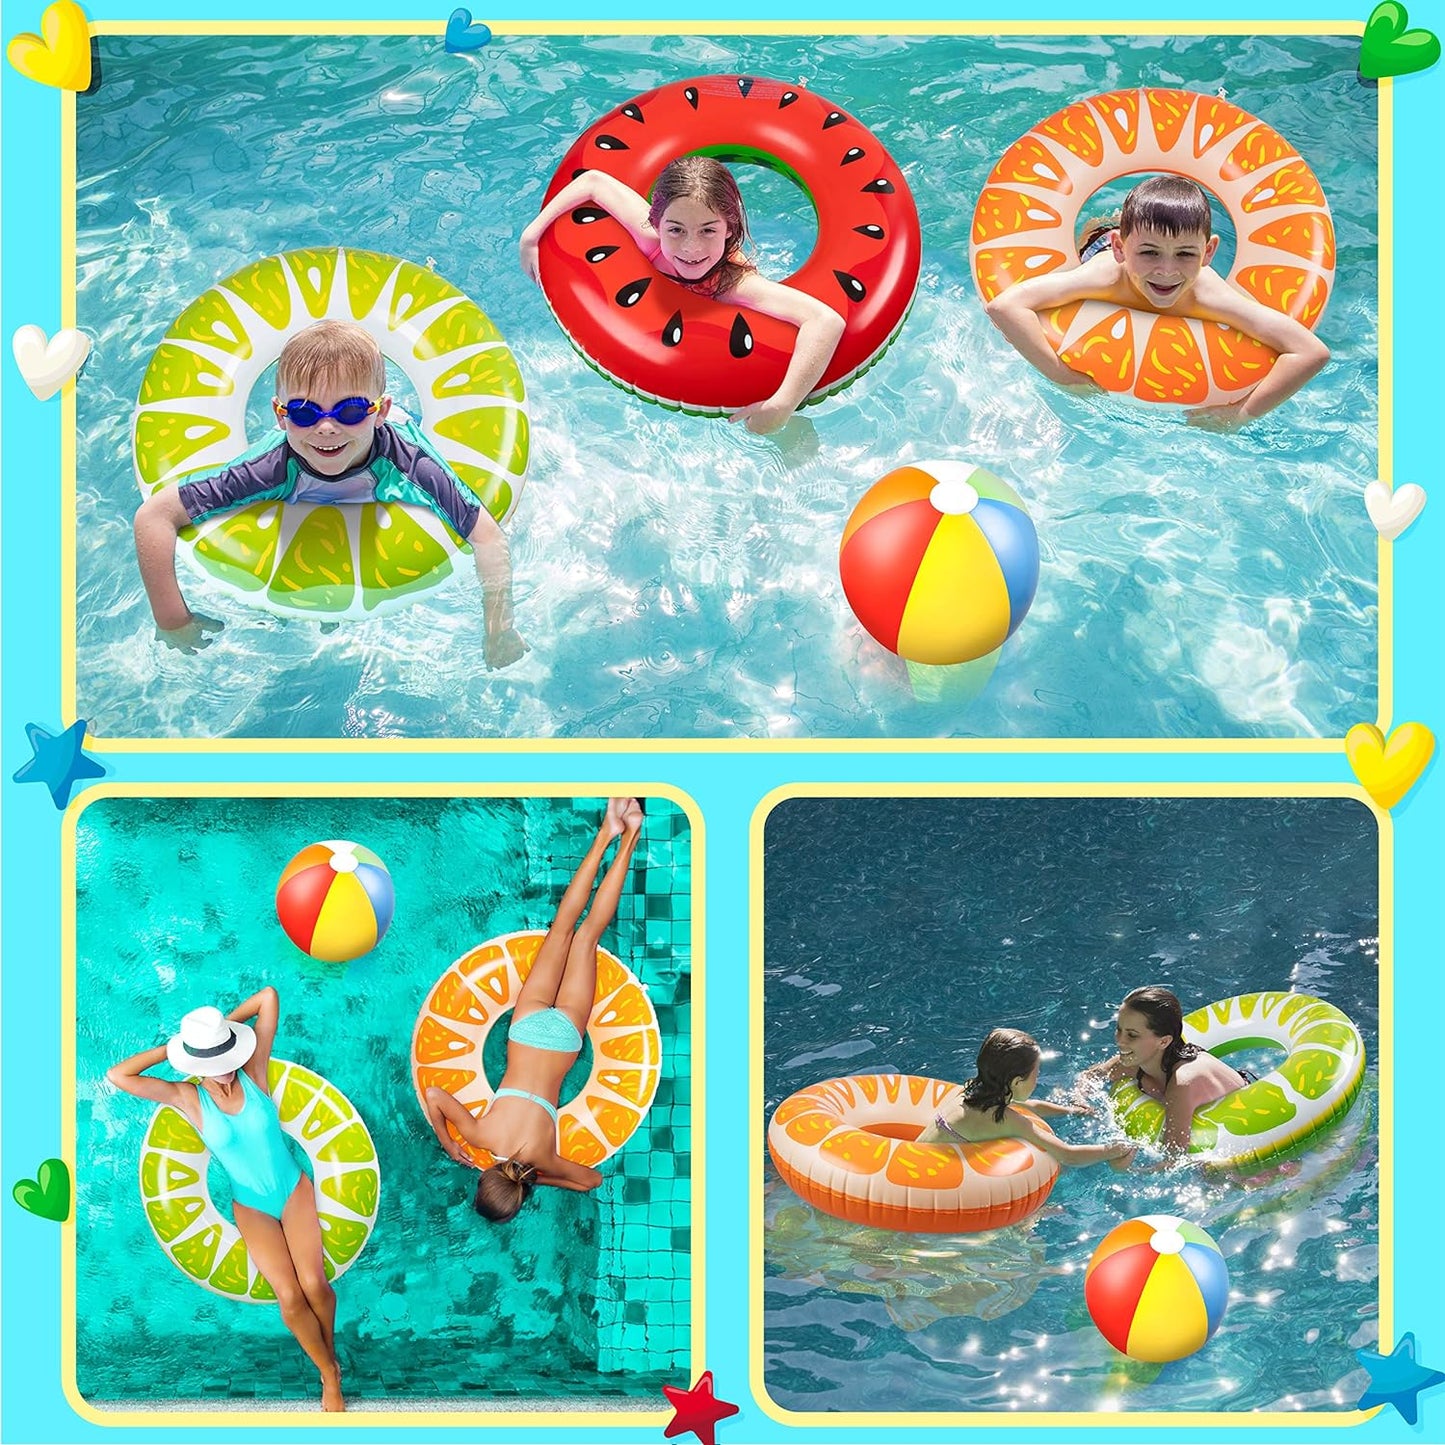 7PCS Fruit Pool Floats: Watermelon Kiwi Orange Lemon Swimming Rings with 13.5" Beach Balls - Inflatable Tubes Floaties Toys for Kids Adults